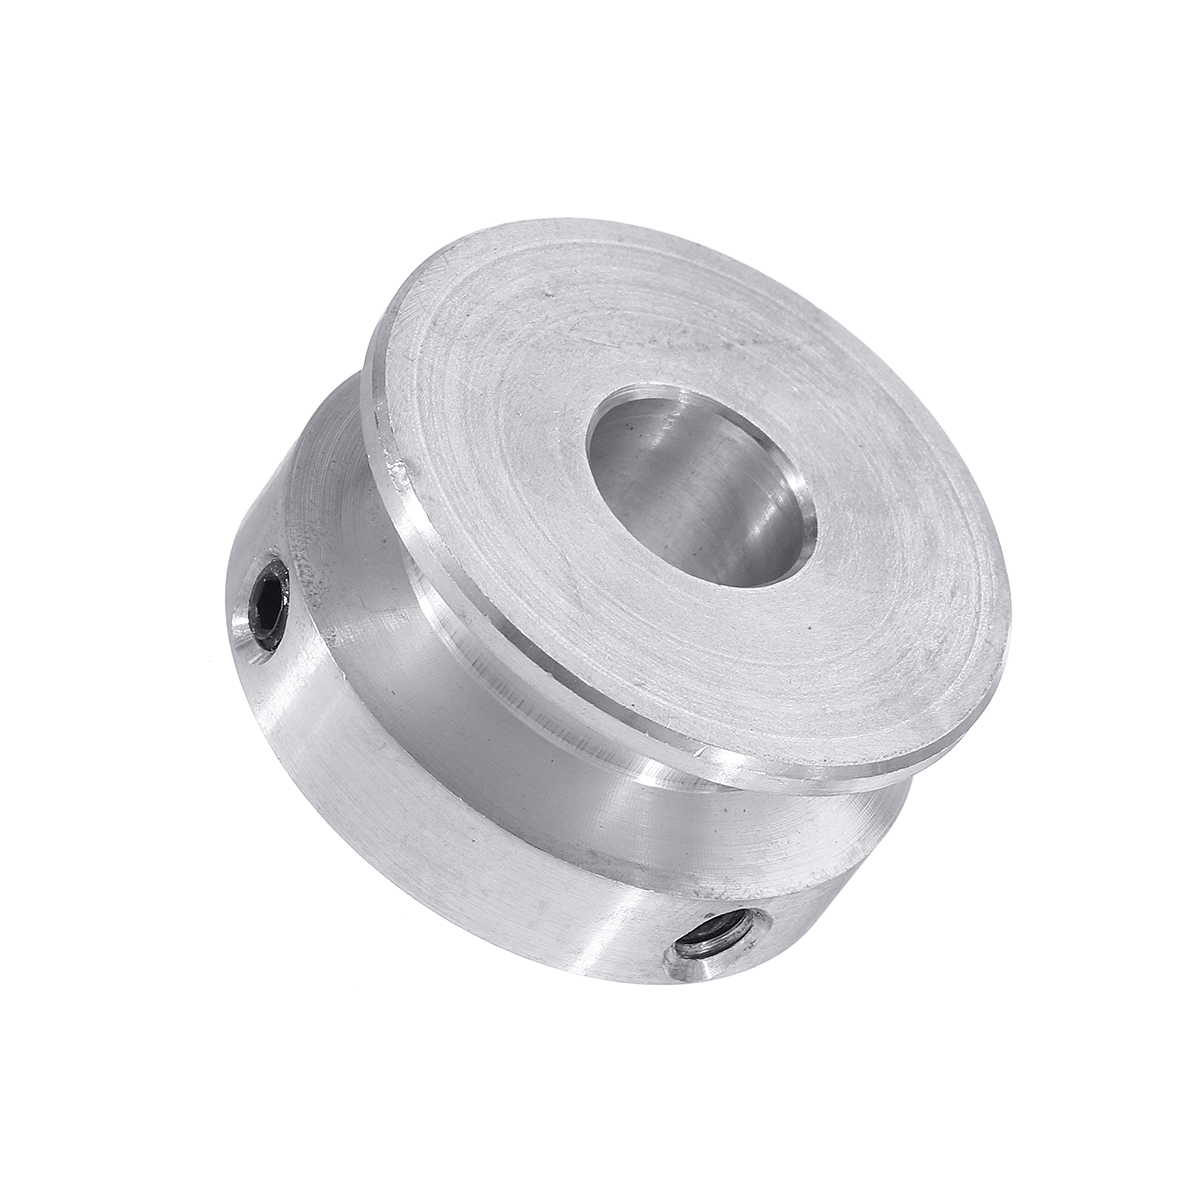 30MM-Single-Groove-Pulley-4-16MM-Fixed-Bore-Pulley-Wheel-for-Motor-Shaft-6MM-Belt-1561882-3